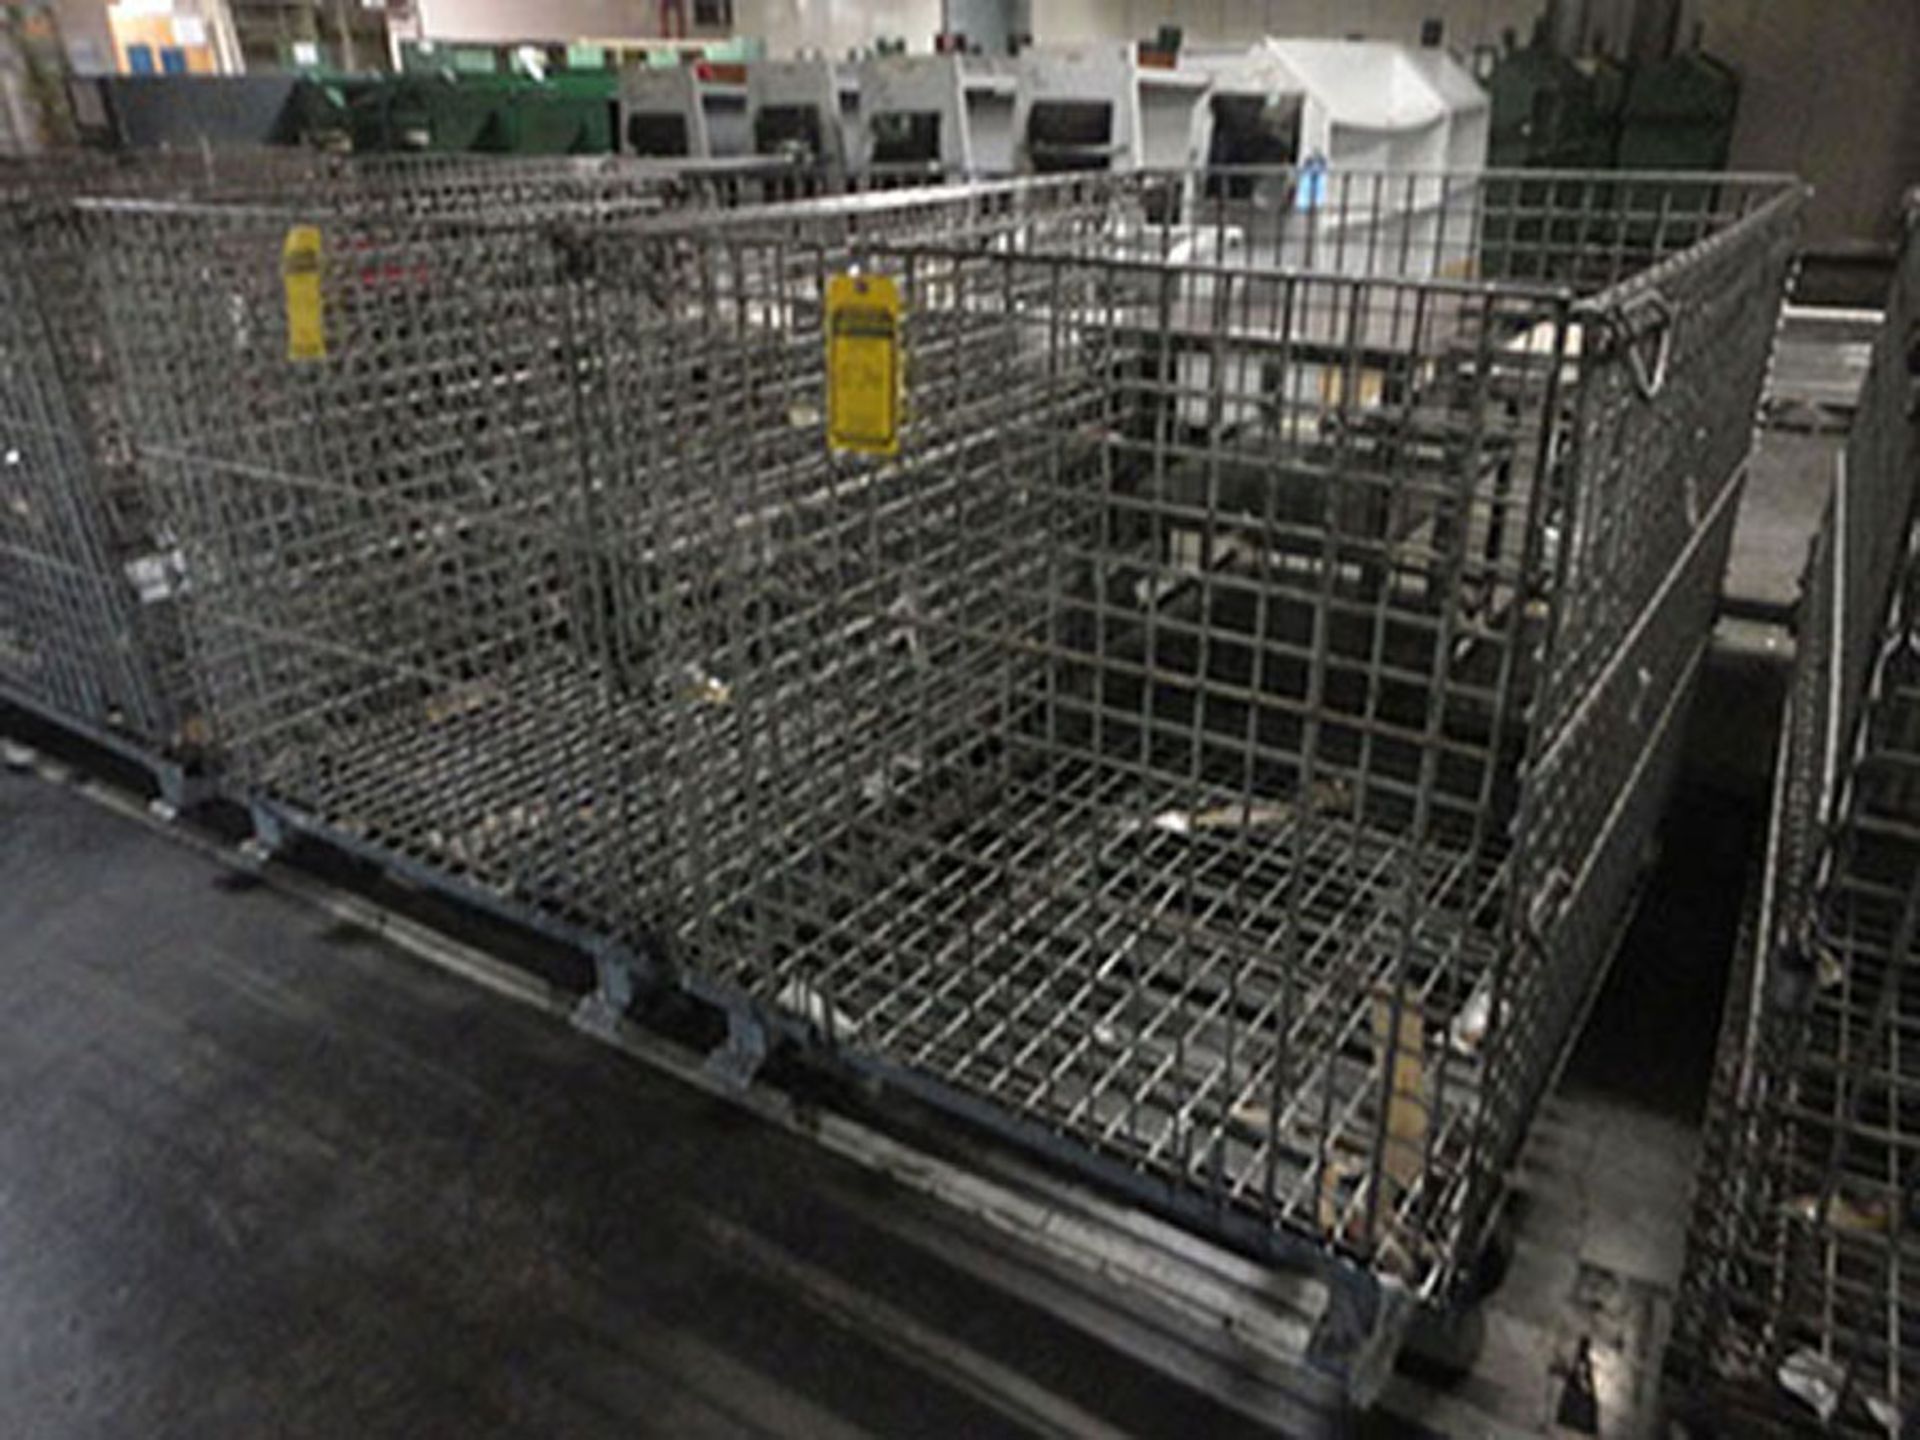 40'' X 48'' X 36'' DEEP PORTABLE / STACKABLE / COLLAPSIBLE WIRE BASKETS (X4) - Image 2 of 2